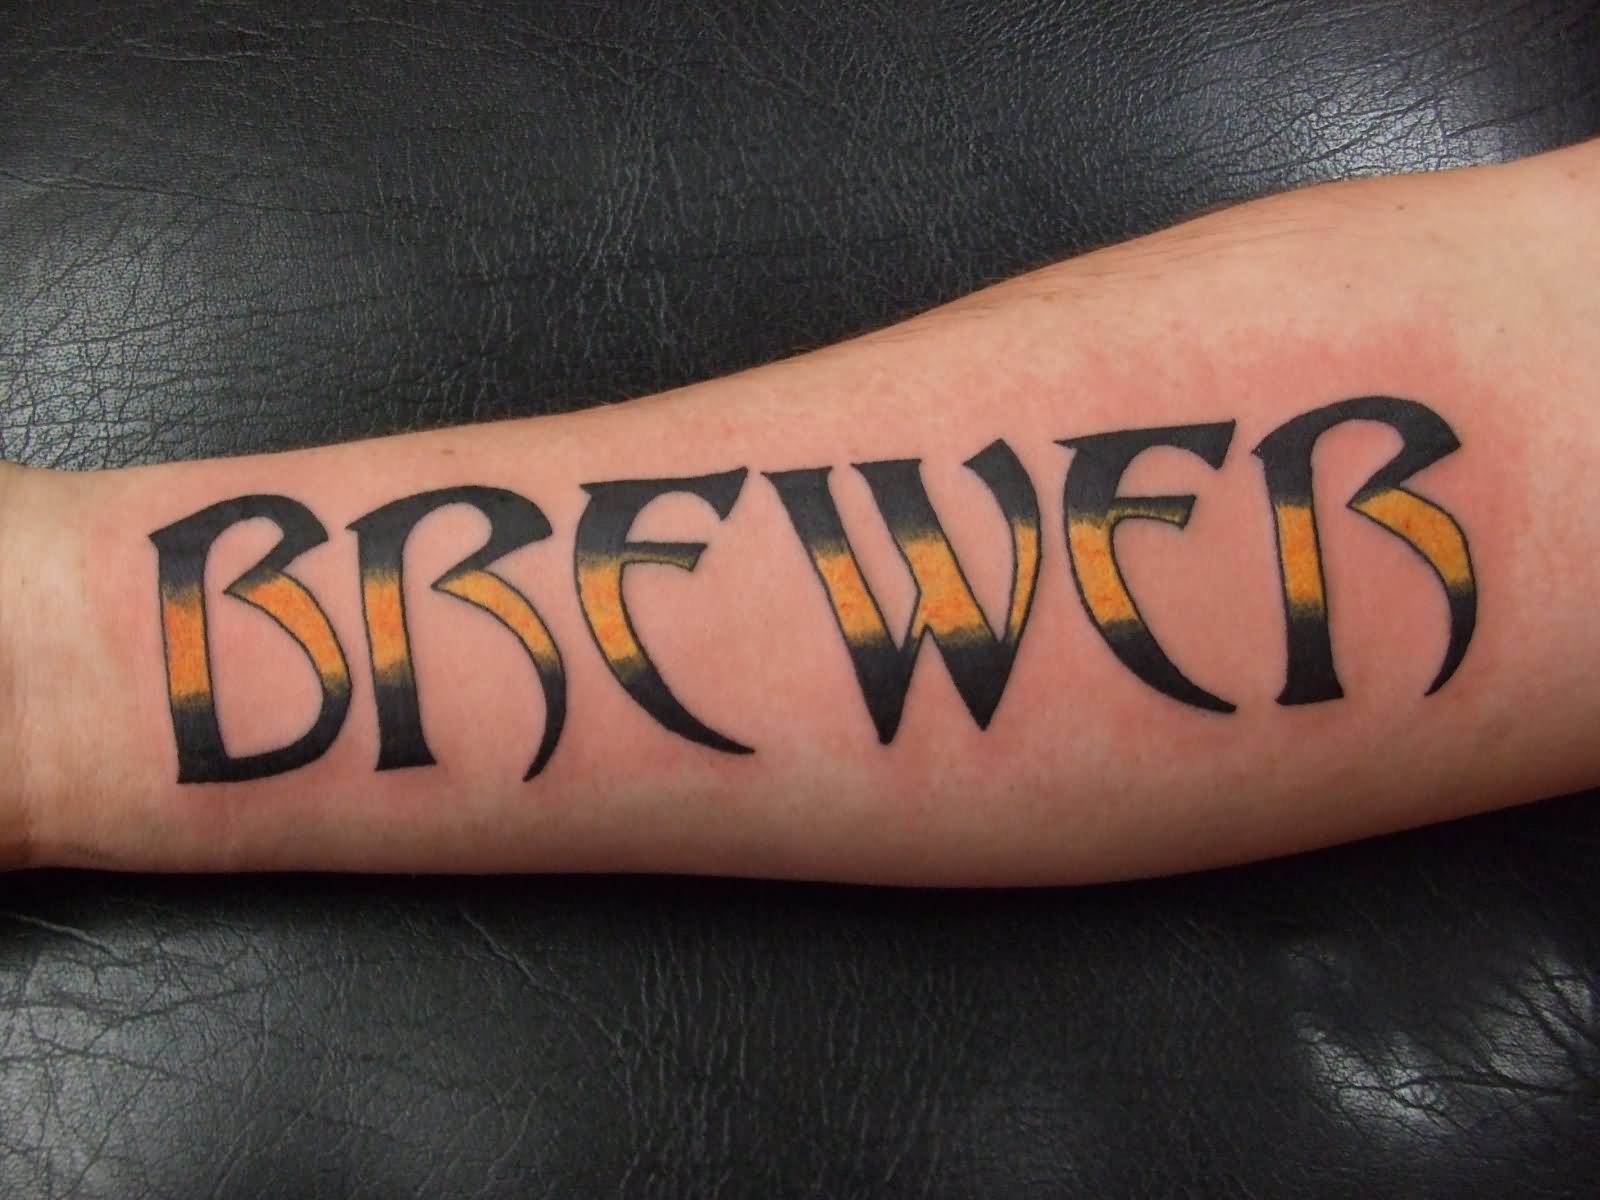 Black And Yellow Brewer Name Tattoo On Forearm